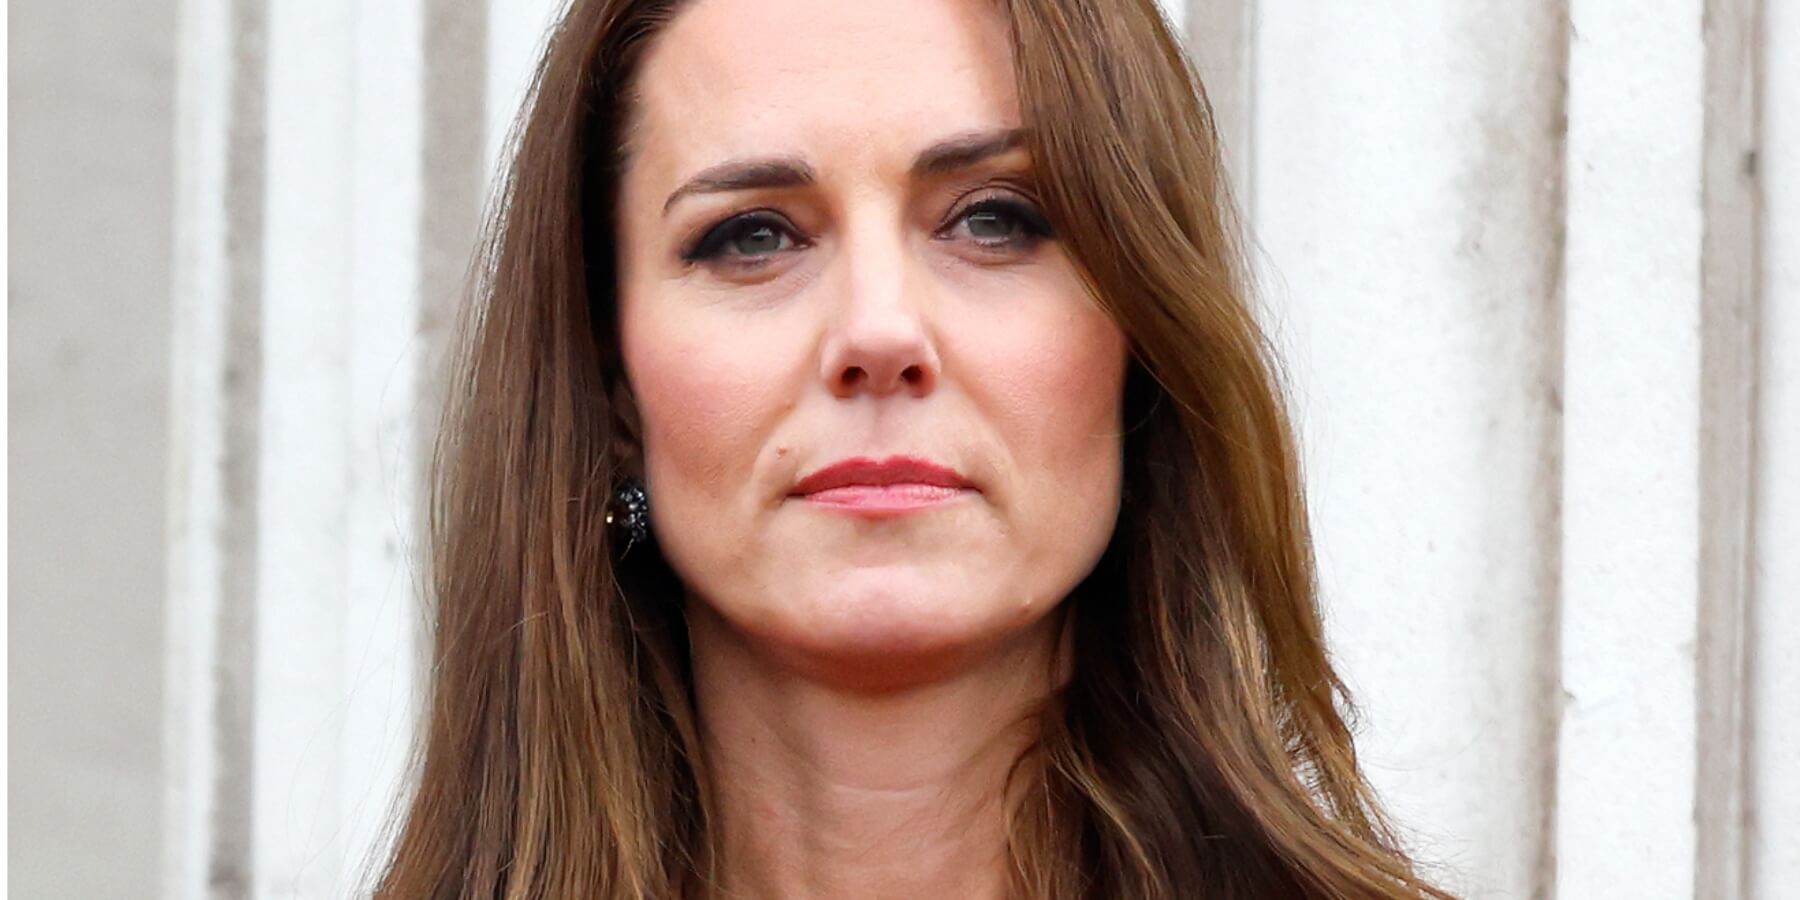 Kate Middleton was 'forced' to reveal cancer diagnosis says commentator